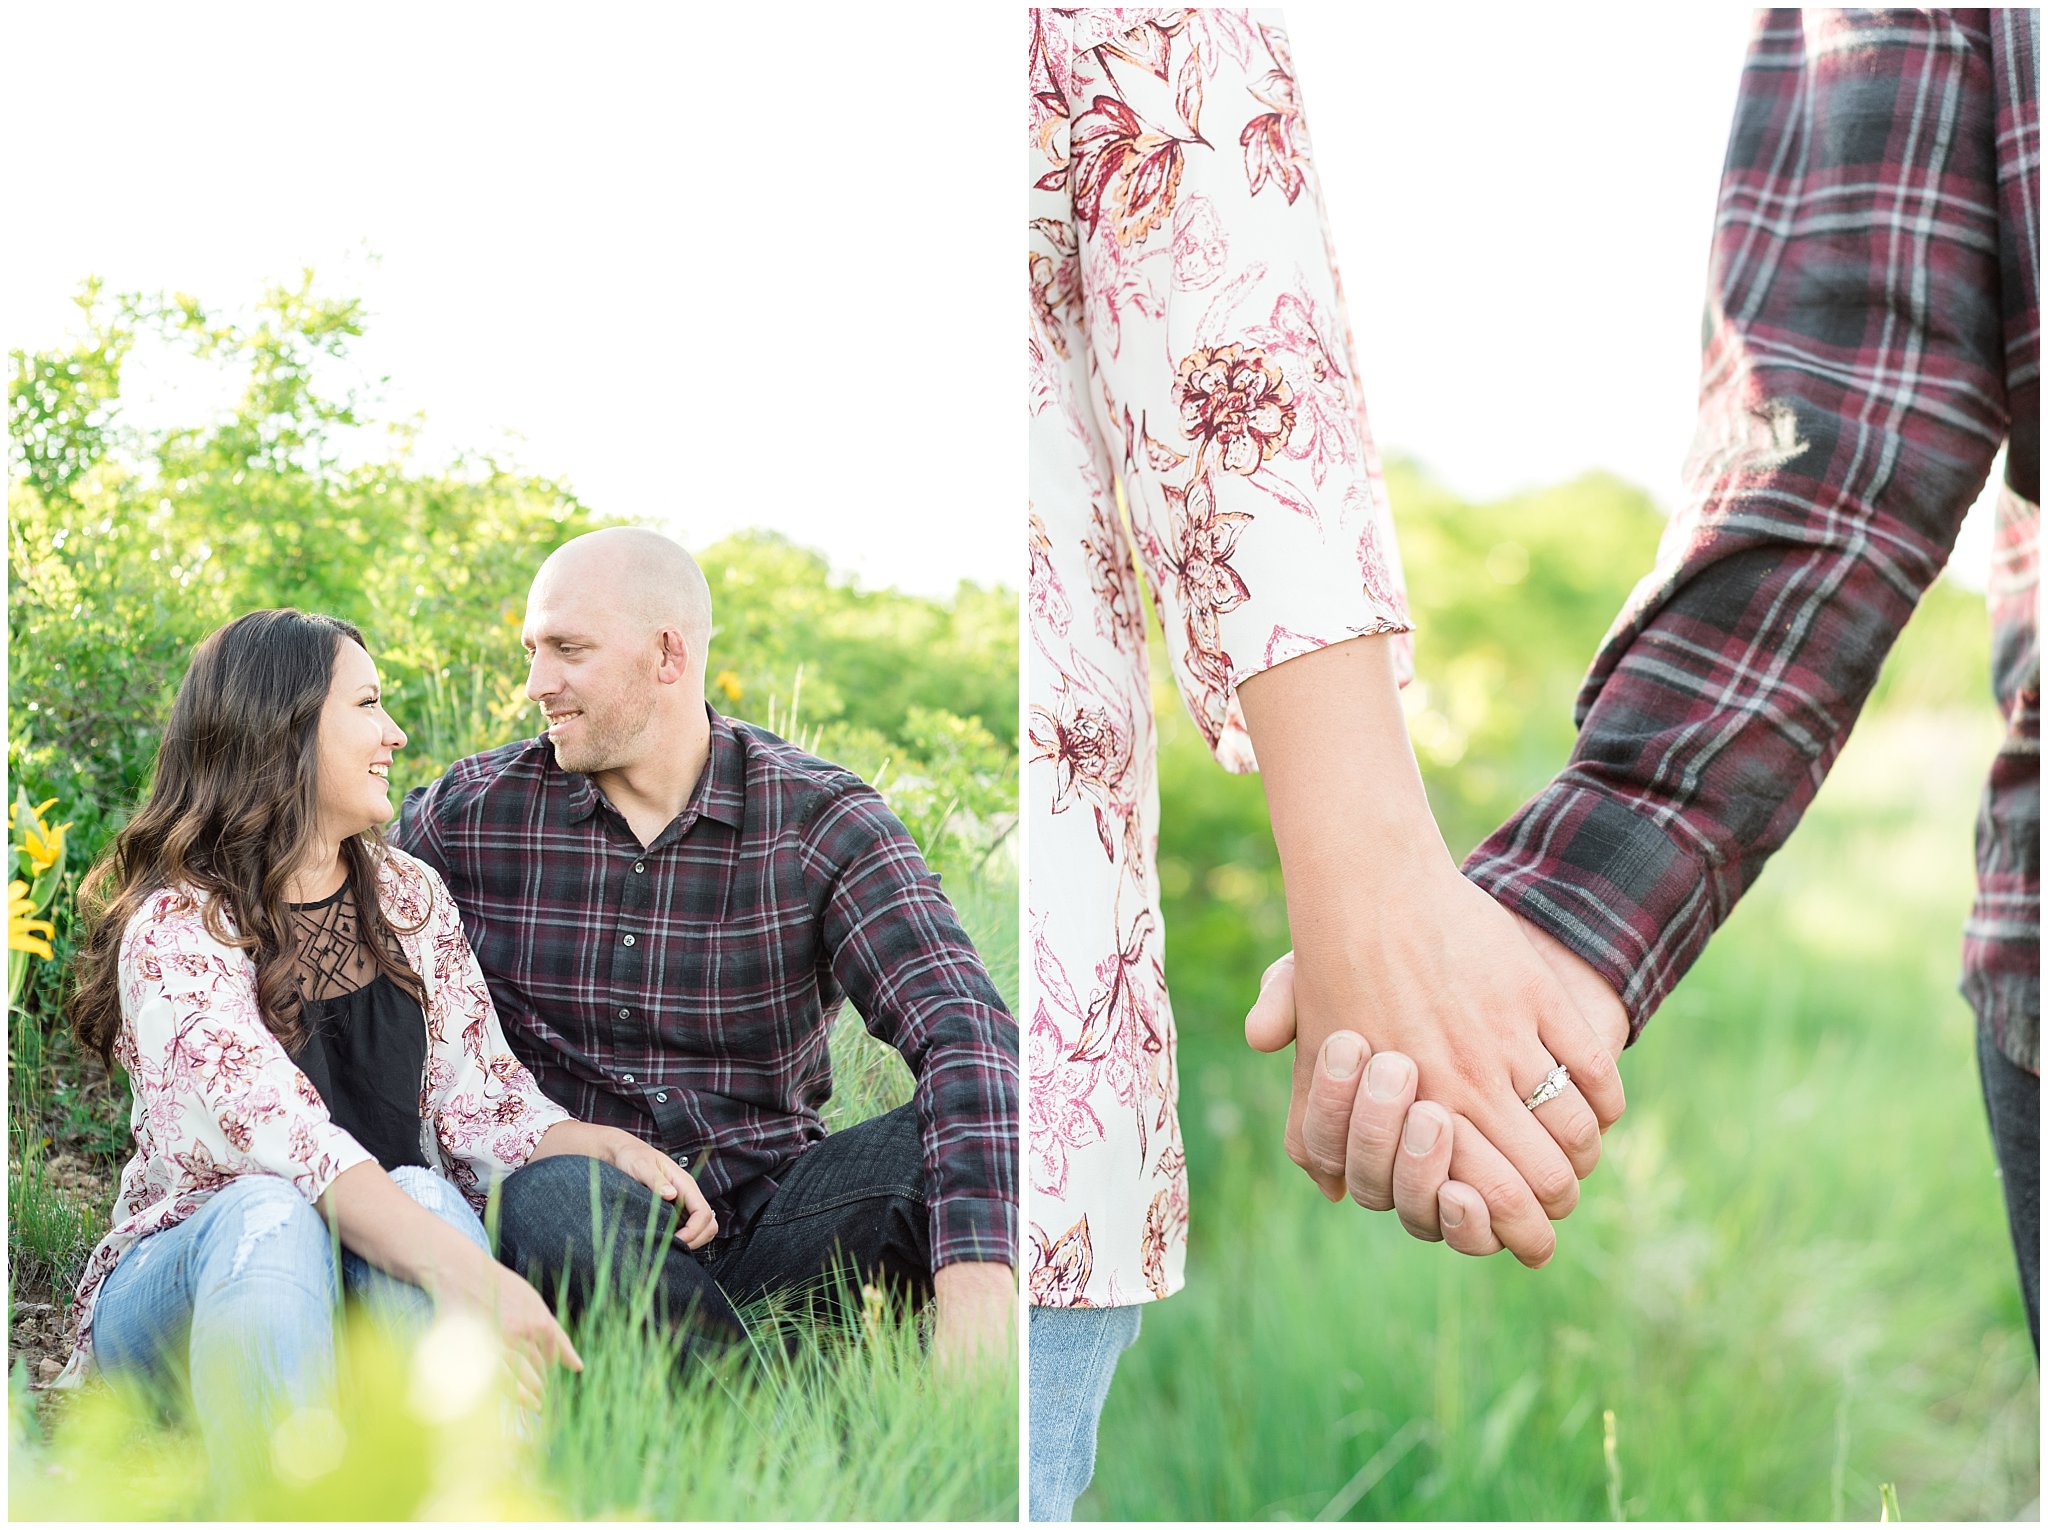 Details shot during engagement session with mountains in the background and wildflowers | Snowbasin Utah Engagements